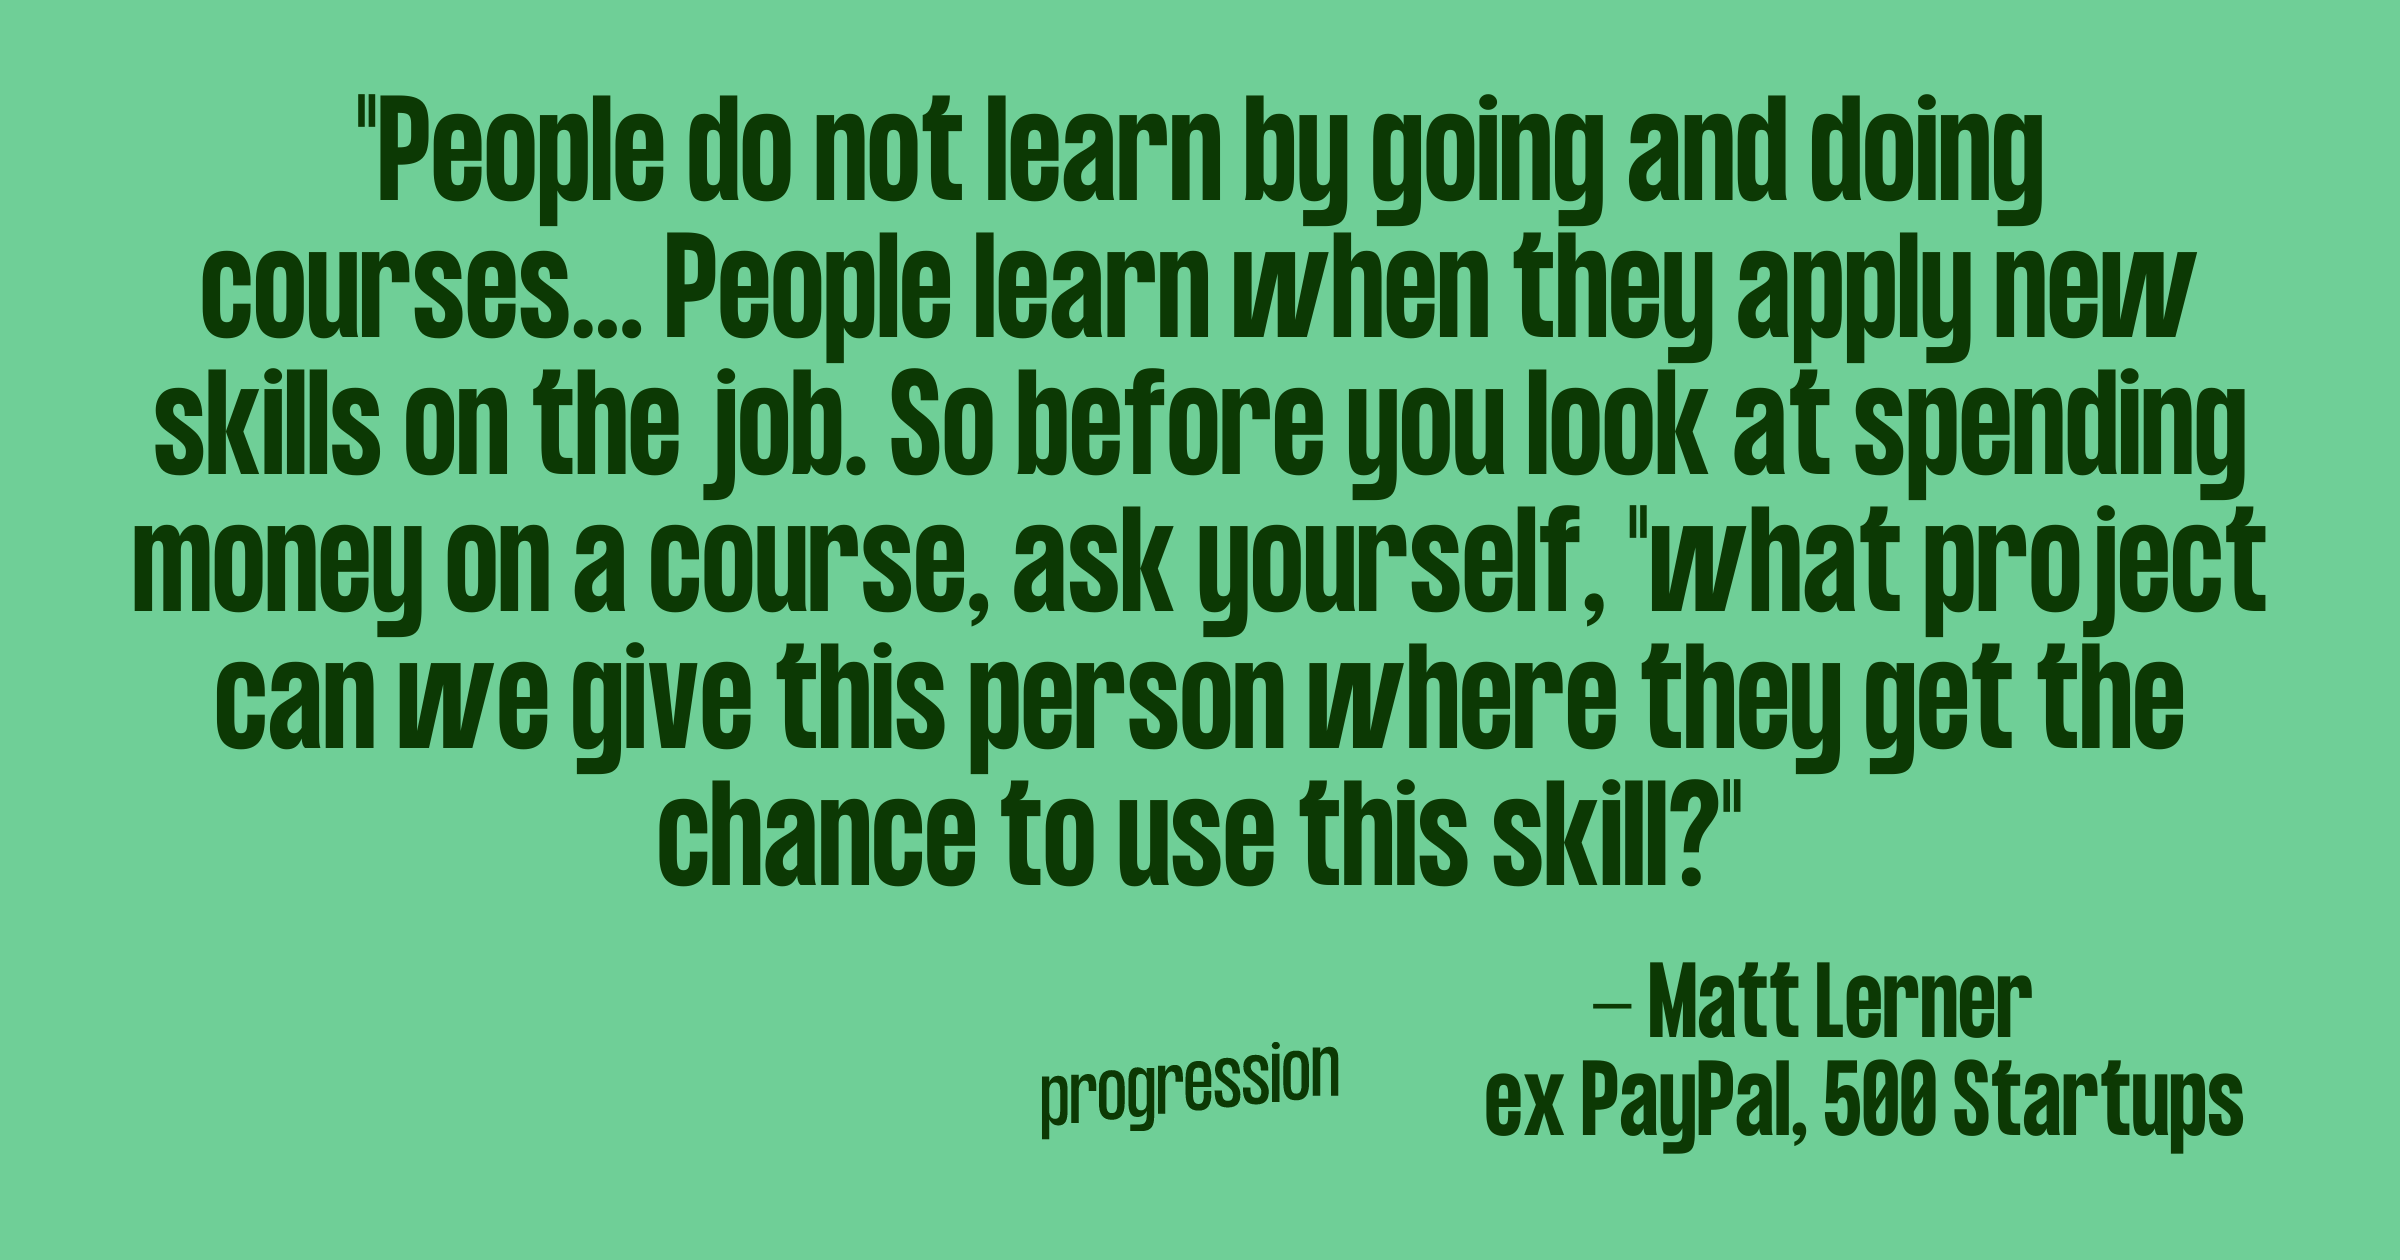 Quote from Matt Learner on learning effectively on the job, explained in the paragraph below